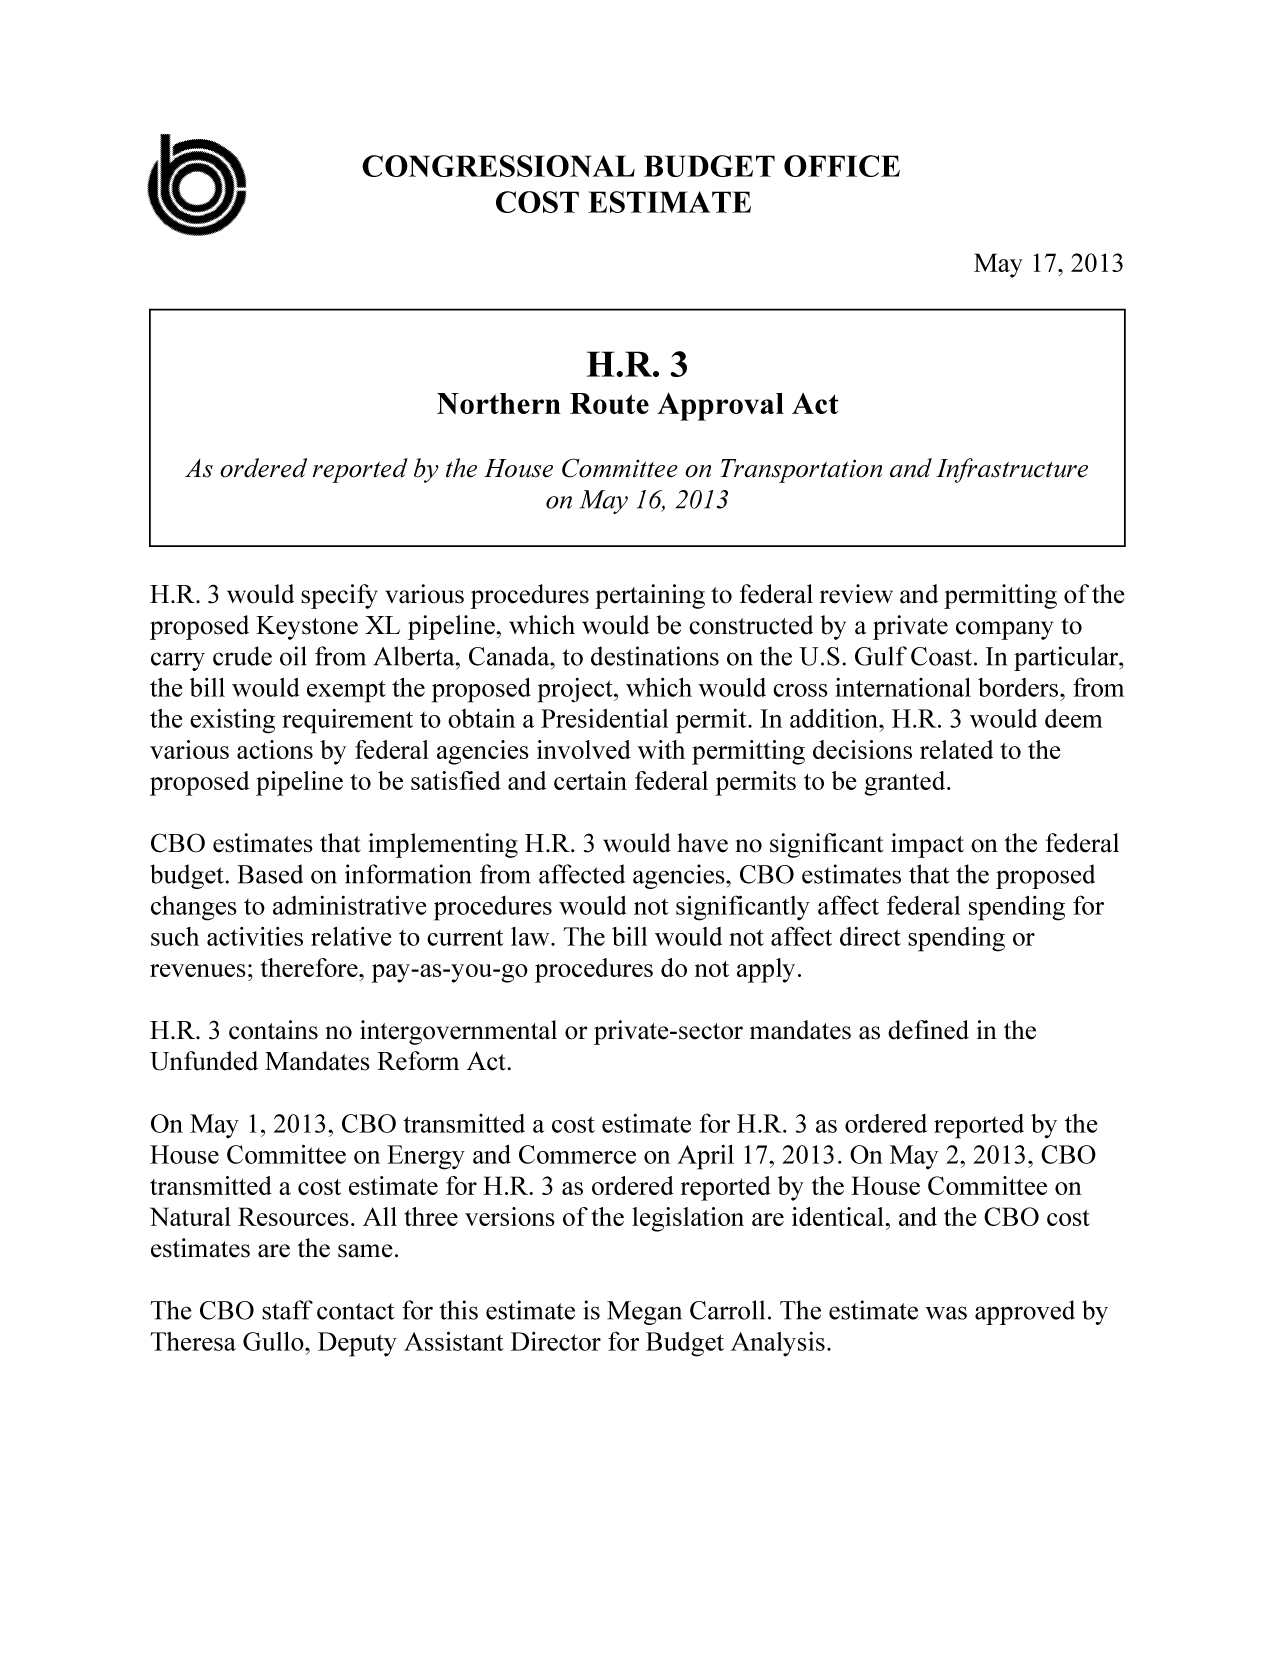 handle is hein.congrec/cbo11097 and id is 1 raw text is: CONGRESSIONAL BUDGET OFFICE
COST ESTIMATE
May 17, 2013
H.R. 3
Northern Route Approval Act
As ordered reported by the House Committee on Transportation and Infrastructure
on May 16, 2013
H.R. 3 would specify various procedures pertaining to federal review and permitting of the
proposed Keystone XL pipeline, which would be constructed by a private company to
carry crude oil from Alberta, Canada, to destinations on the U.S. Gulf Coast. In particular,
the bill would exempt the proposed project, which would cross international borders, from
the existing requirement to obtain a Presidential permit. In addition, H.R. 3 would deem
various actions by federal agencies involved with permitting decisions related to the
proposed pipeline to be satisfied and certain federal permits to be granted.
CBO estimates that implementing H.R. 3 would have no significant impact on the federal
budget. Based on information from affected agencies, CBO estimates that the proposed
changes to administrative procedures would not significantly affect federal spending for
such activities relative to current law. The bill would not affect direct spending or
revenues; therefore, pay-as-you-go procedures do not apply.
H.R. 3 contains no intergovernmental or private-sector mandates as defined in the
Unfunded Mandates Reform Act.
On May 1, 2013, CBO transmitted a cost estimate for H.R. 3 as ordered reported by the
House Committee on Energy and Commerce on April 17, 2013. On May 2, 2013, CBO
transmitted a cost estimate for H.R. 3 as ordered reported by the House Committee on
Natural Resources. All three versions of the legislation are identical, and the CBO cost
estimates are the same.
The CBO staff contact for this estimate is Megan Carroll. The estimate was approved by
Theresa Gullo, Deputy Assistant Director for Budget Analysis.


